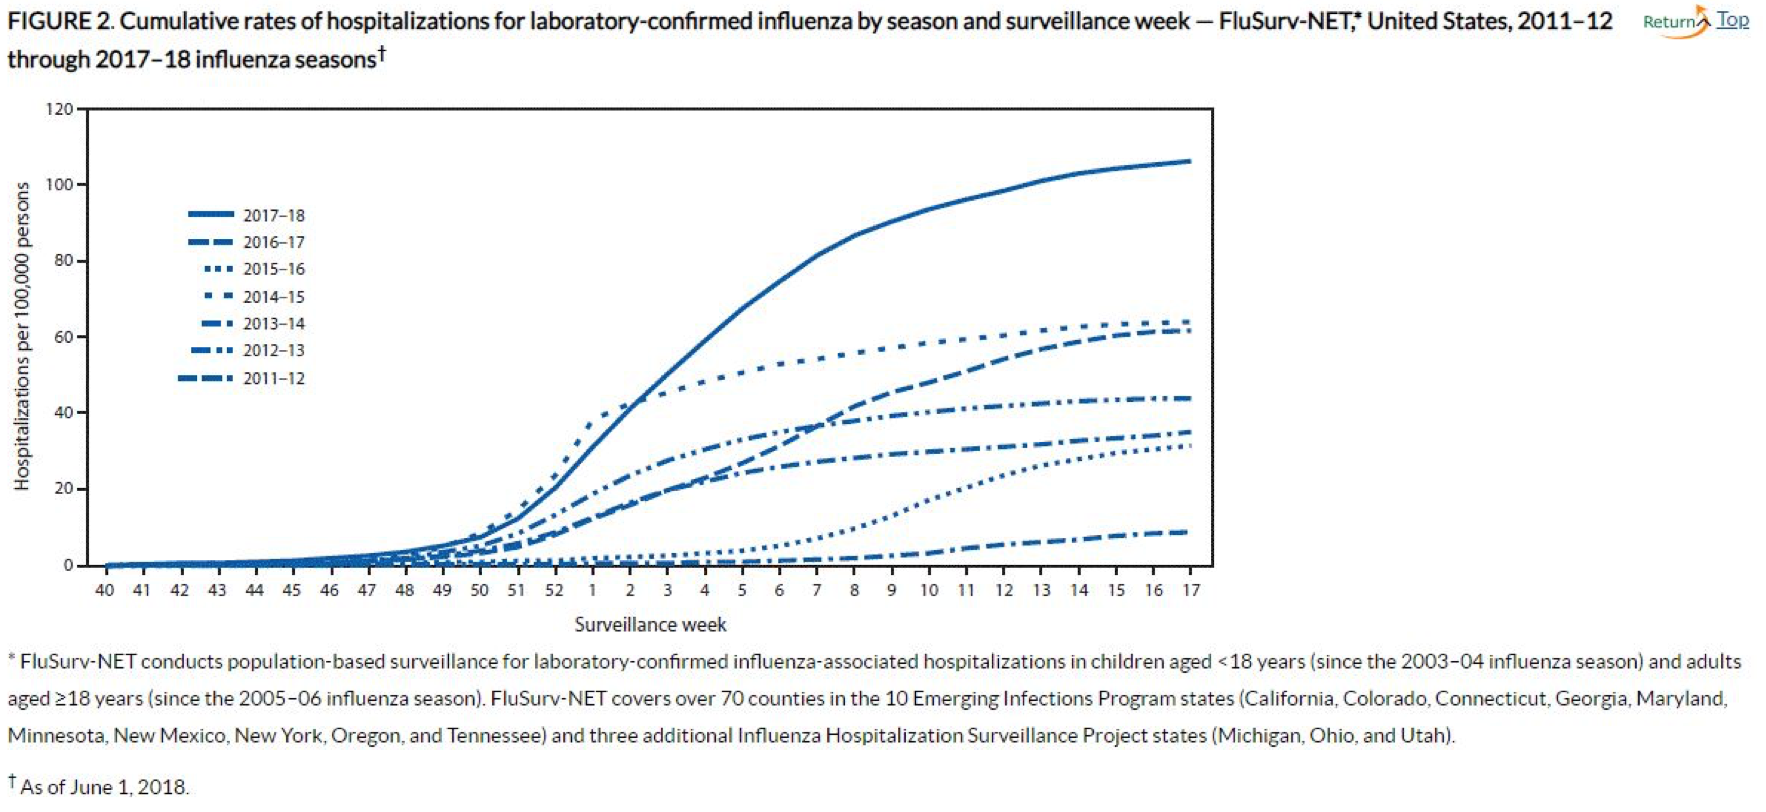 Cumulative rates of hospitalization for laboratory-confirmed influenza